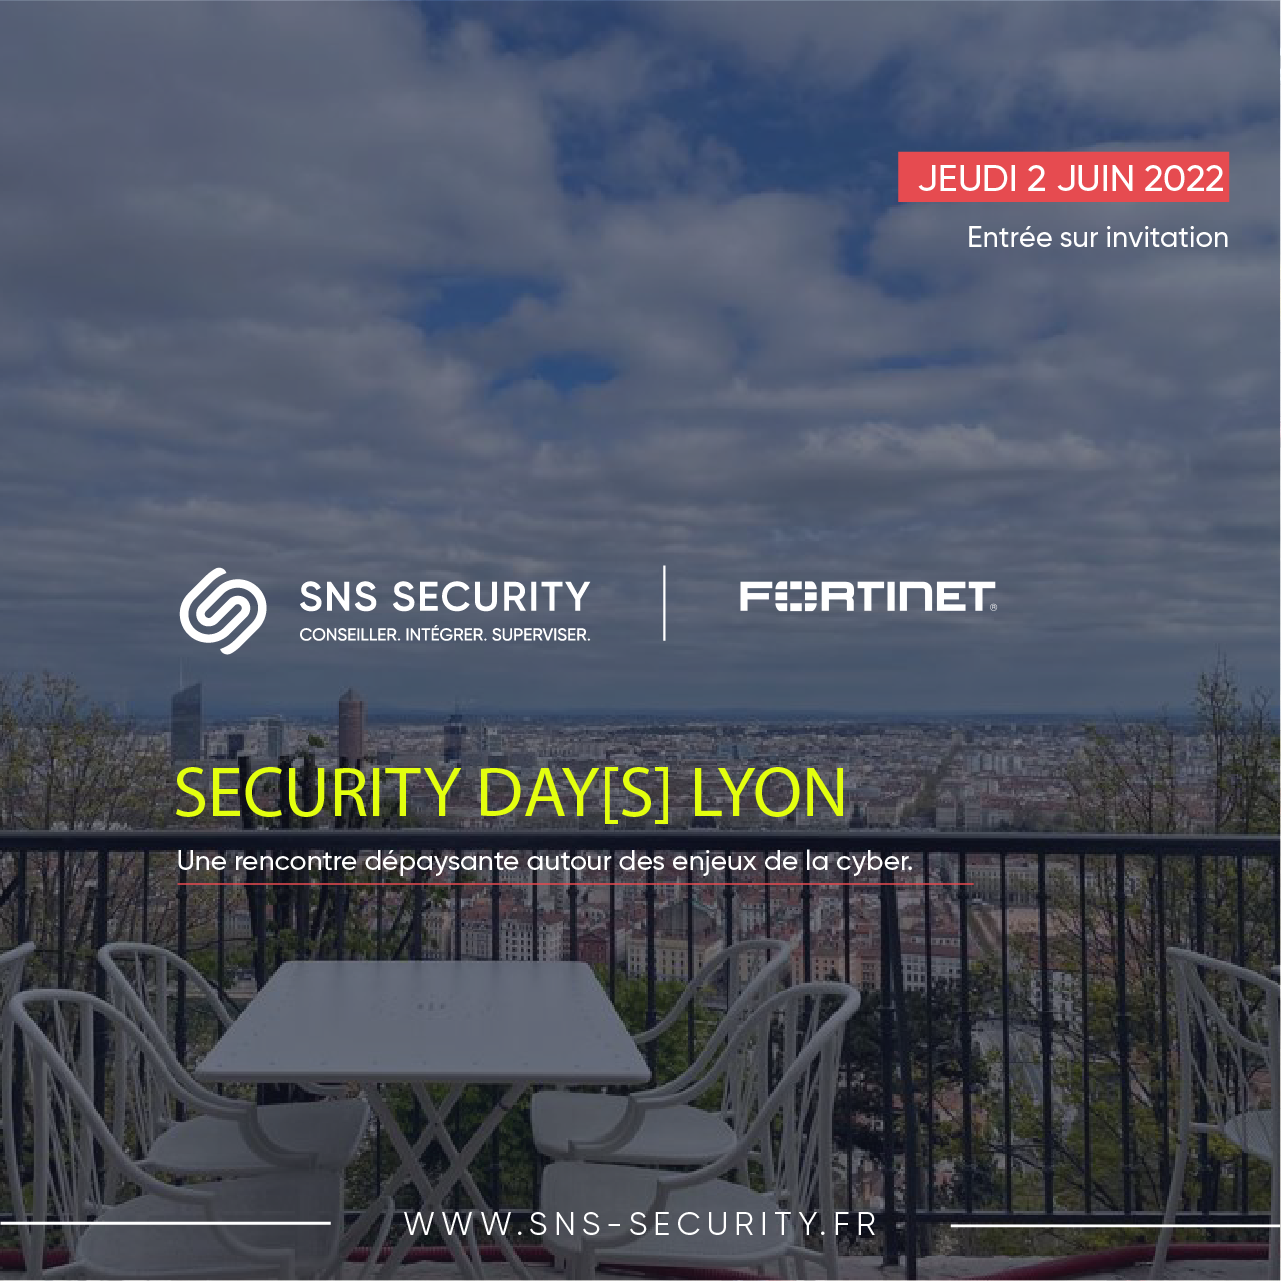 evenement security days bordeaux fortinet sentinelone